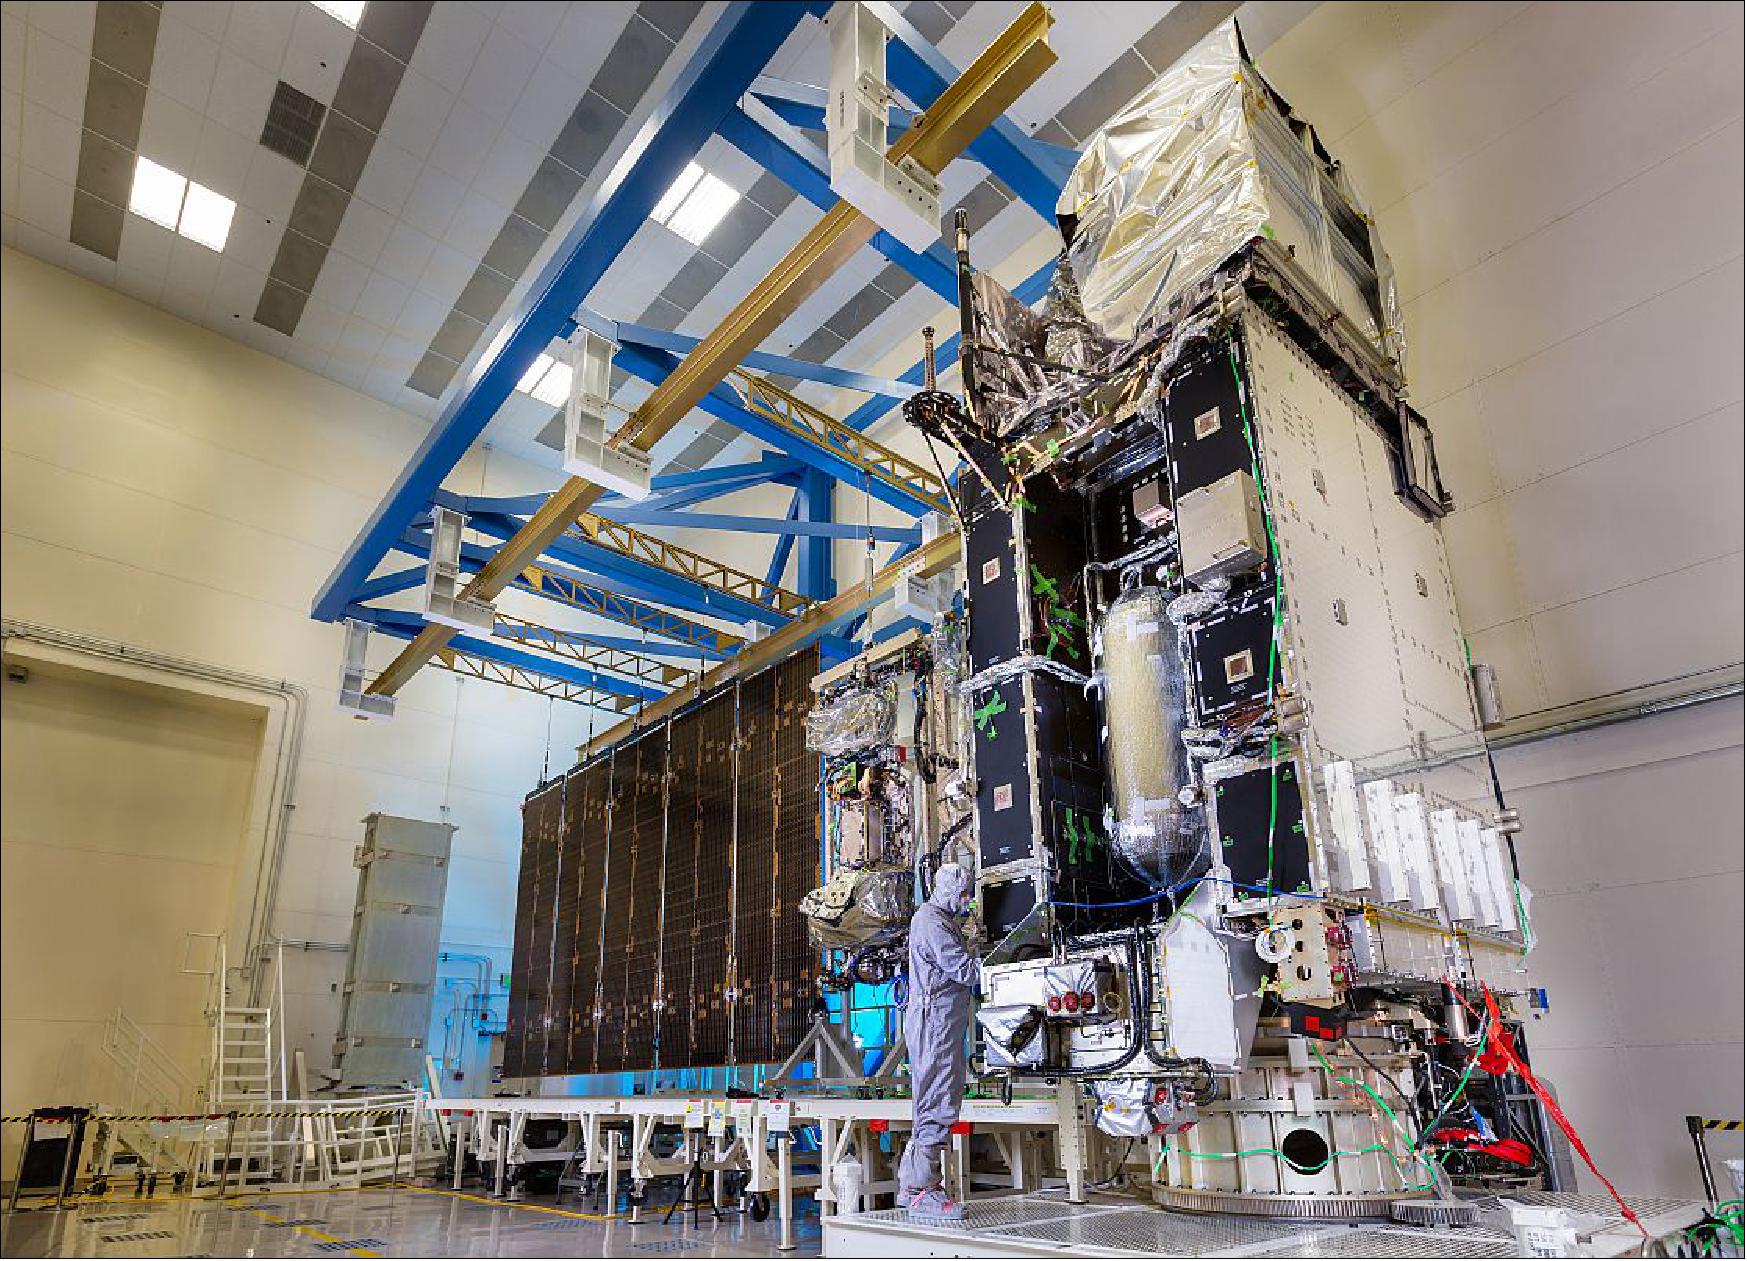 Figure 16: Lockheed Martin engineers and technicians test the deployment of the large GOES-R satellite solar array before the spacecraft undergoes environmental testing (image credit: Lockheed Martin)